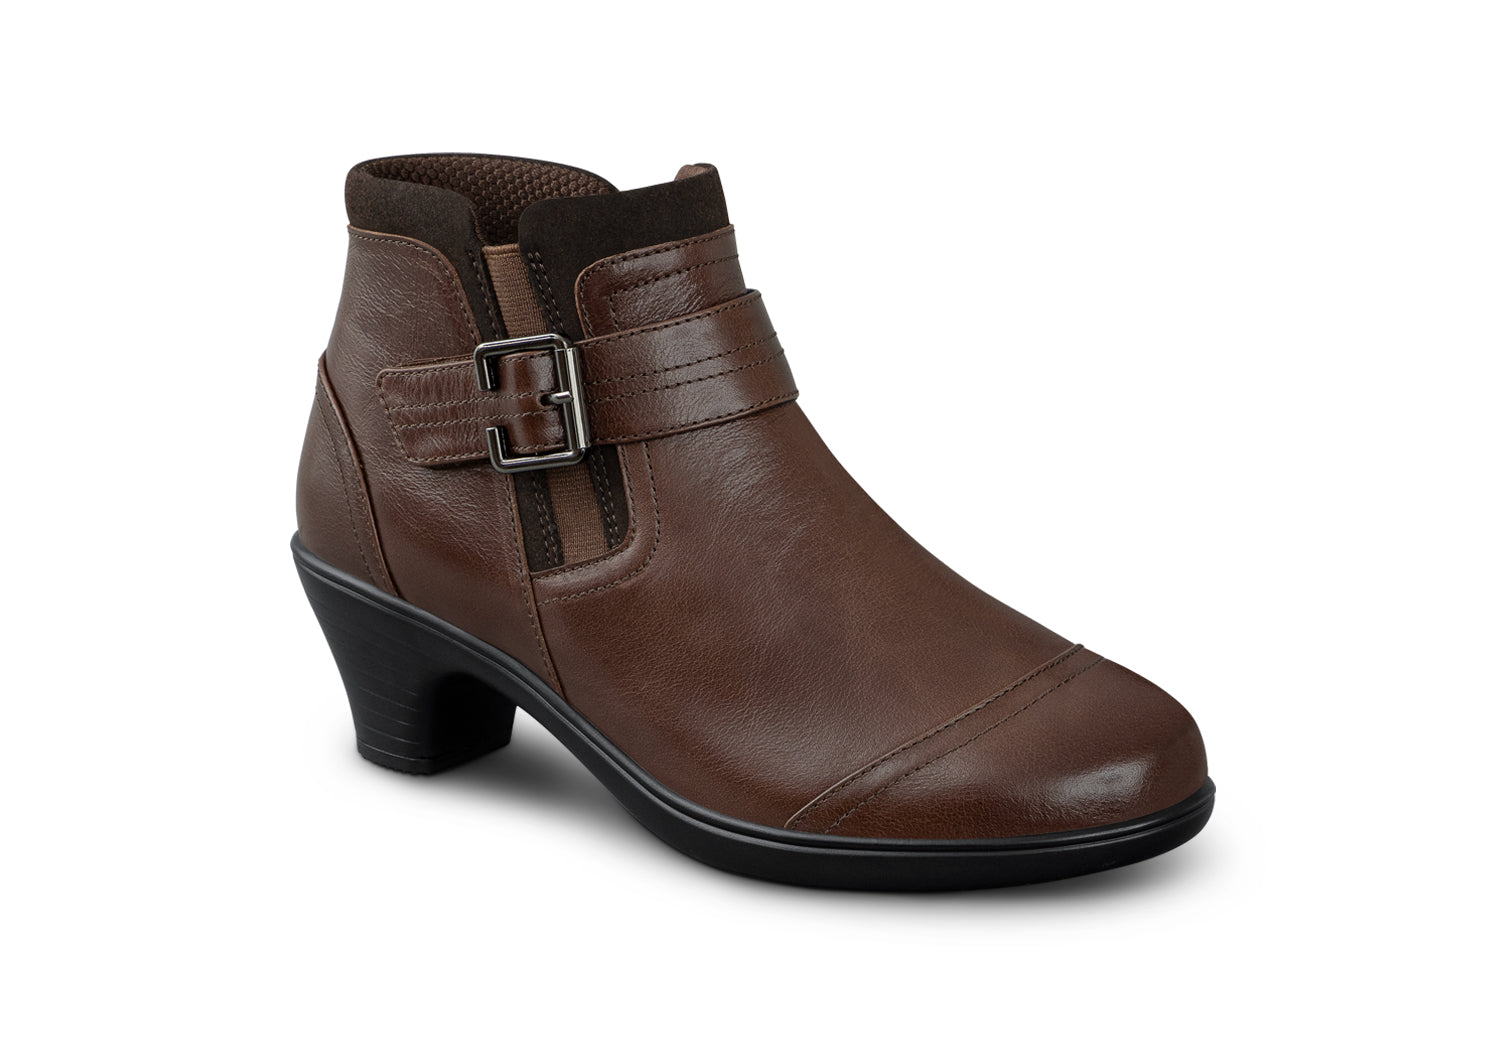 Ankle Boots | Women's Ankle Boots & Booties | boohoo Canada